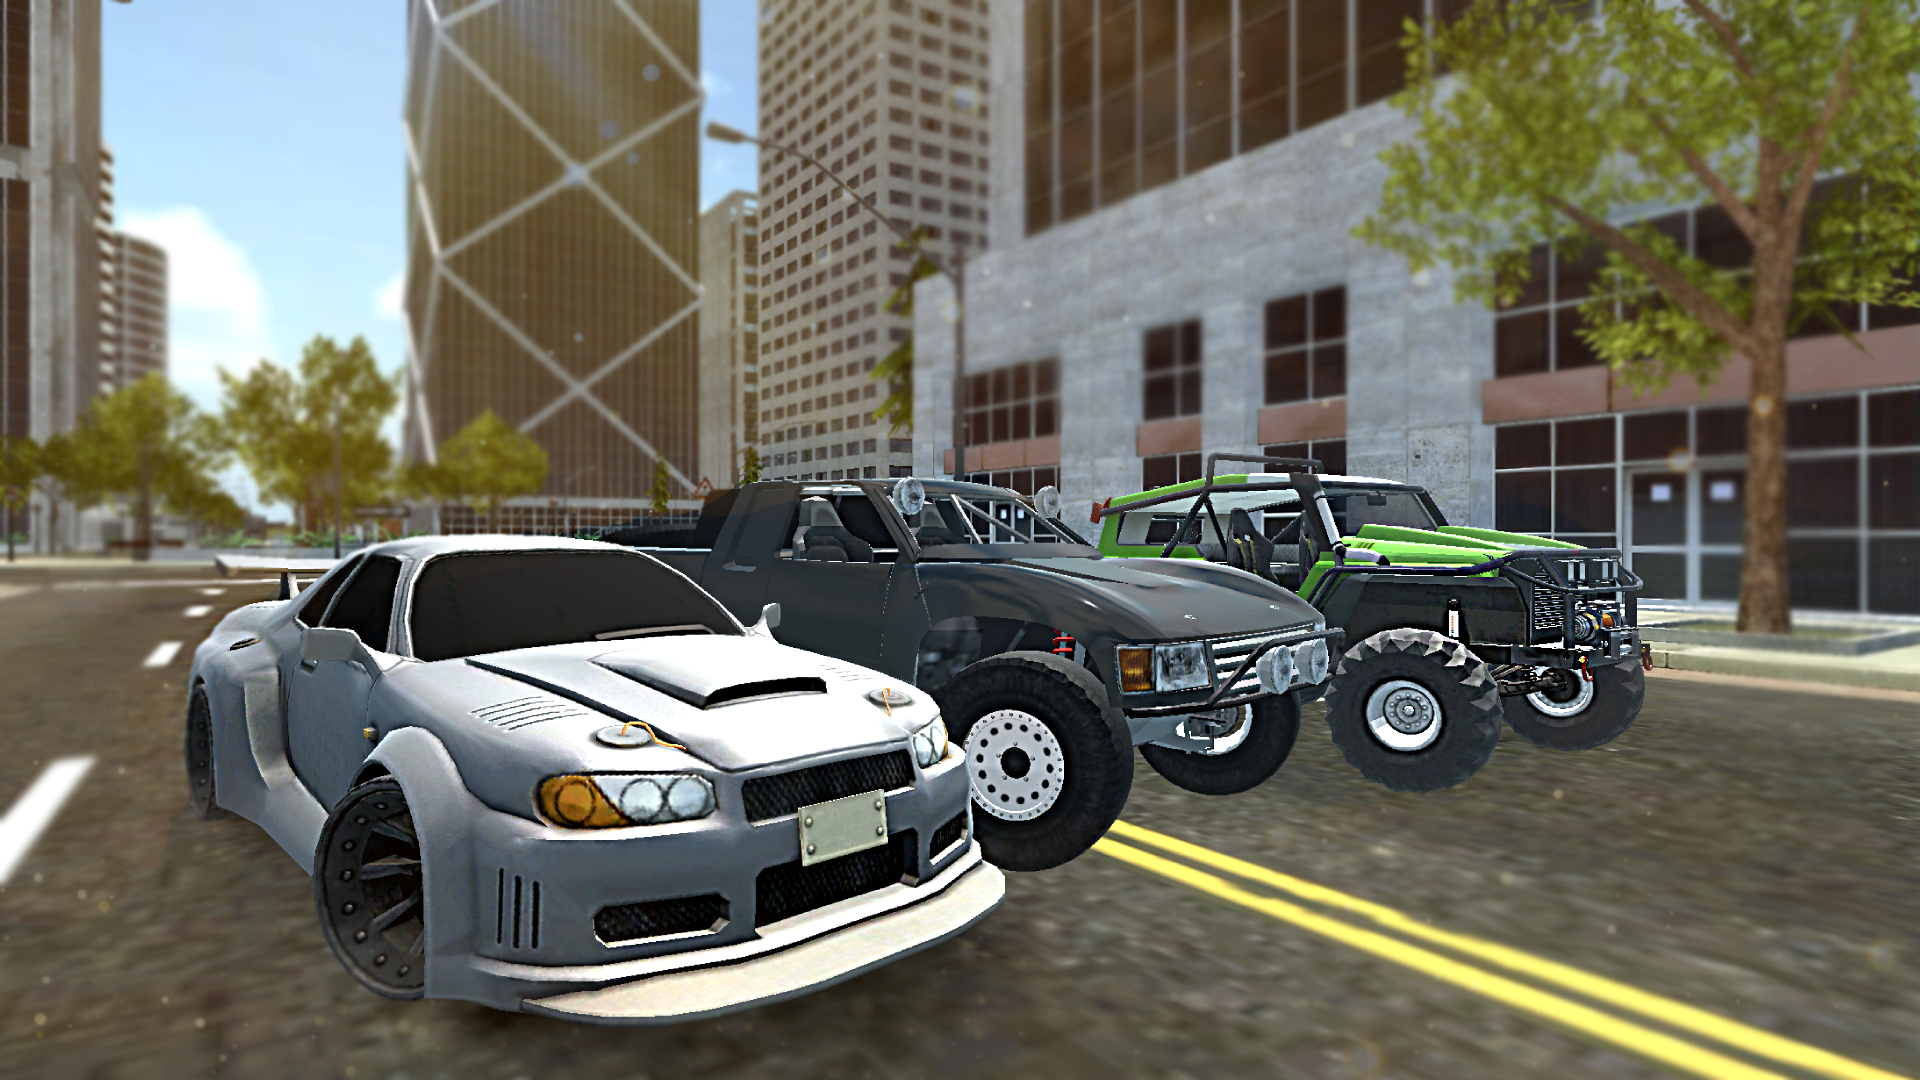 Play Extreme Car Driving Simulator Online for Free on PC & Mobile